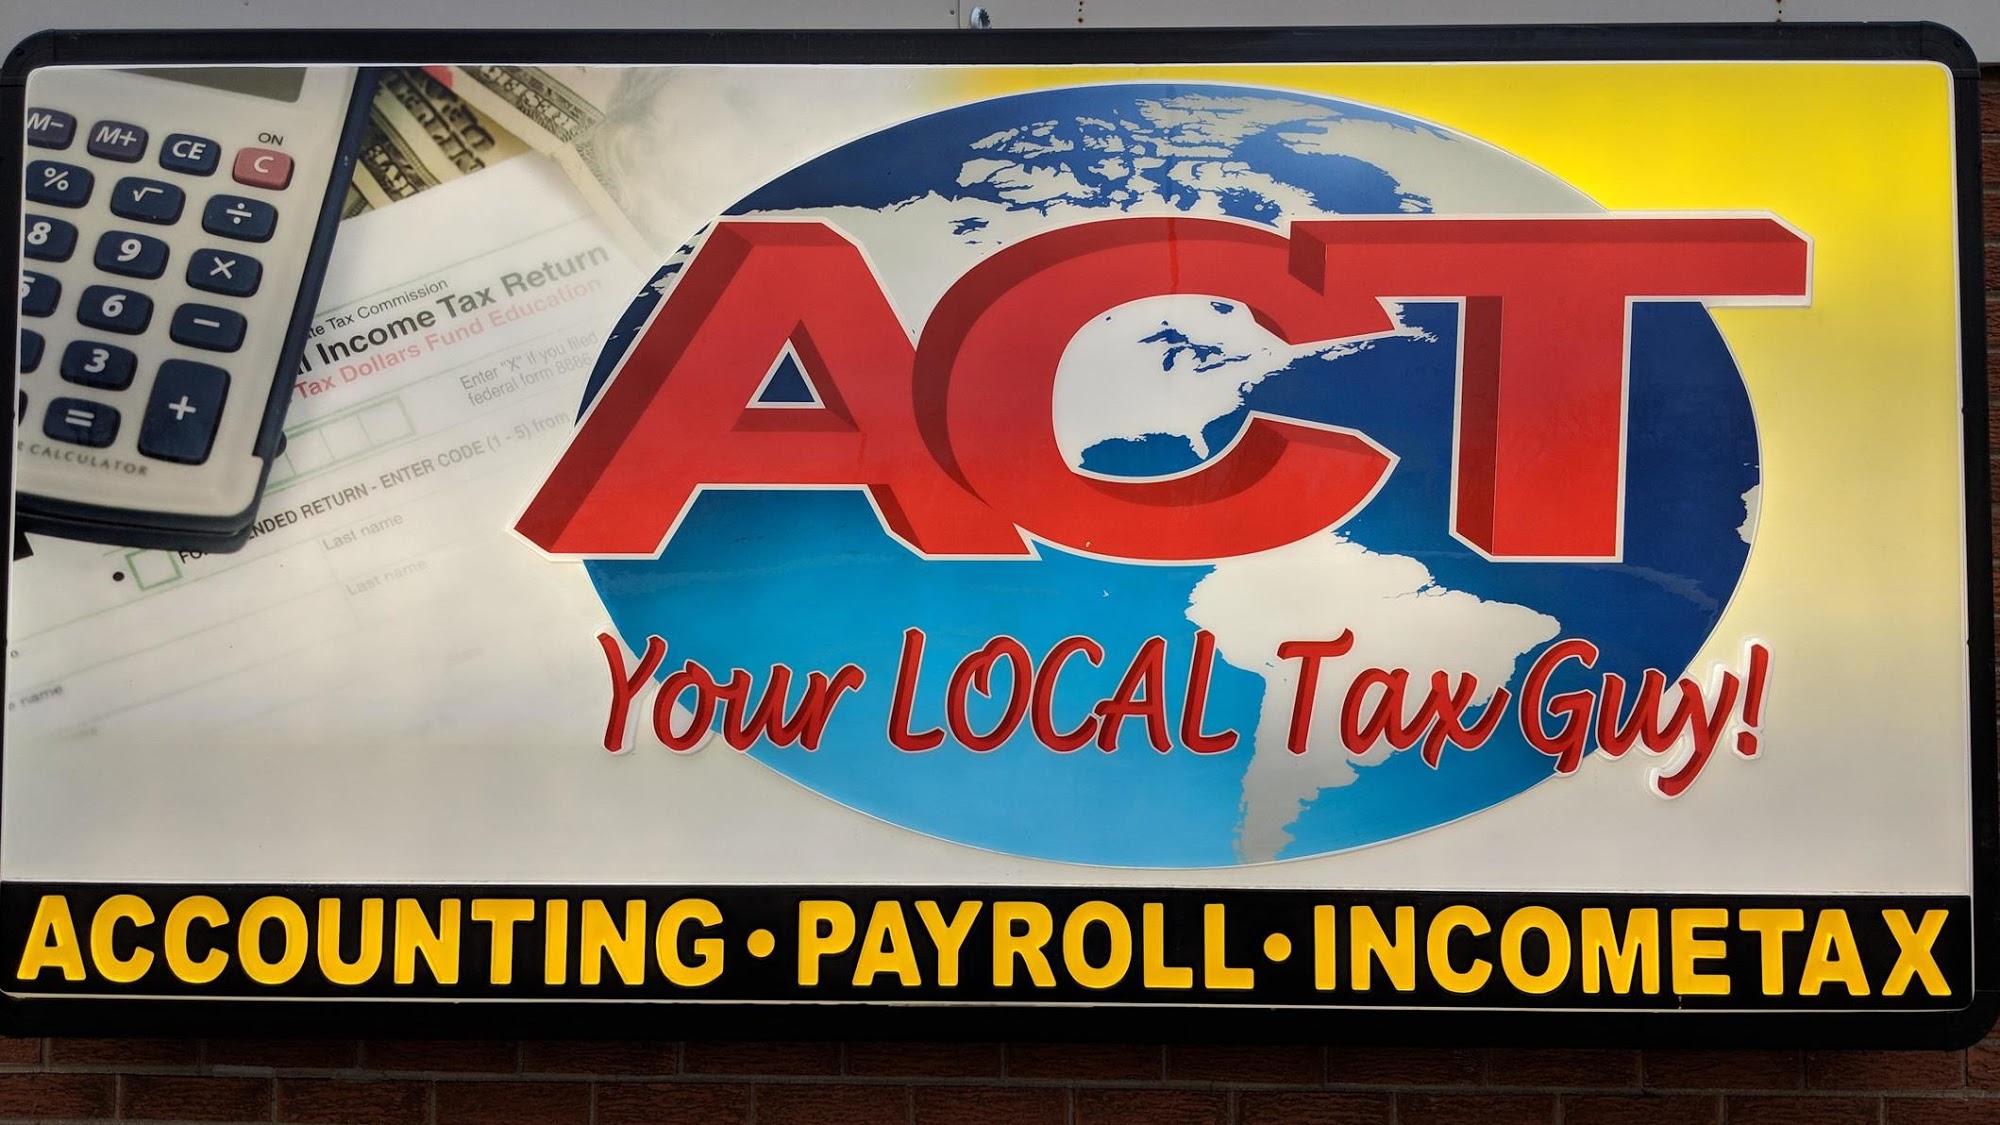 ACT Professional Services Inc